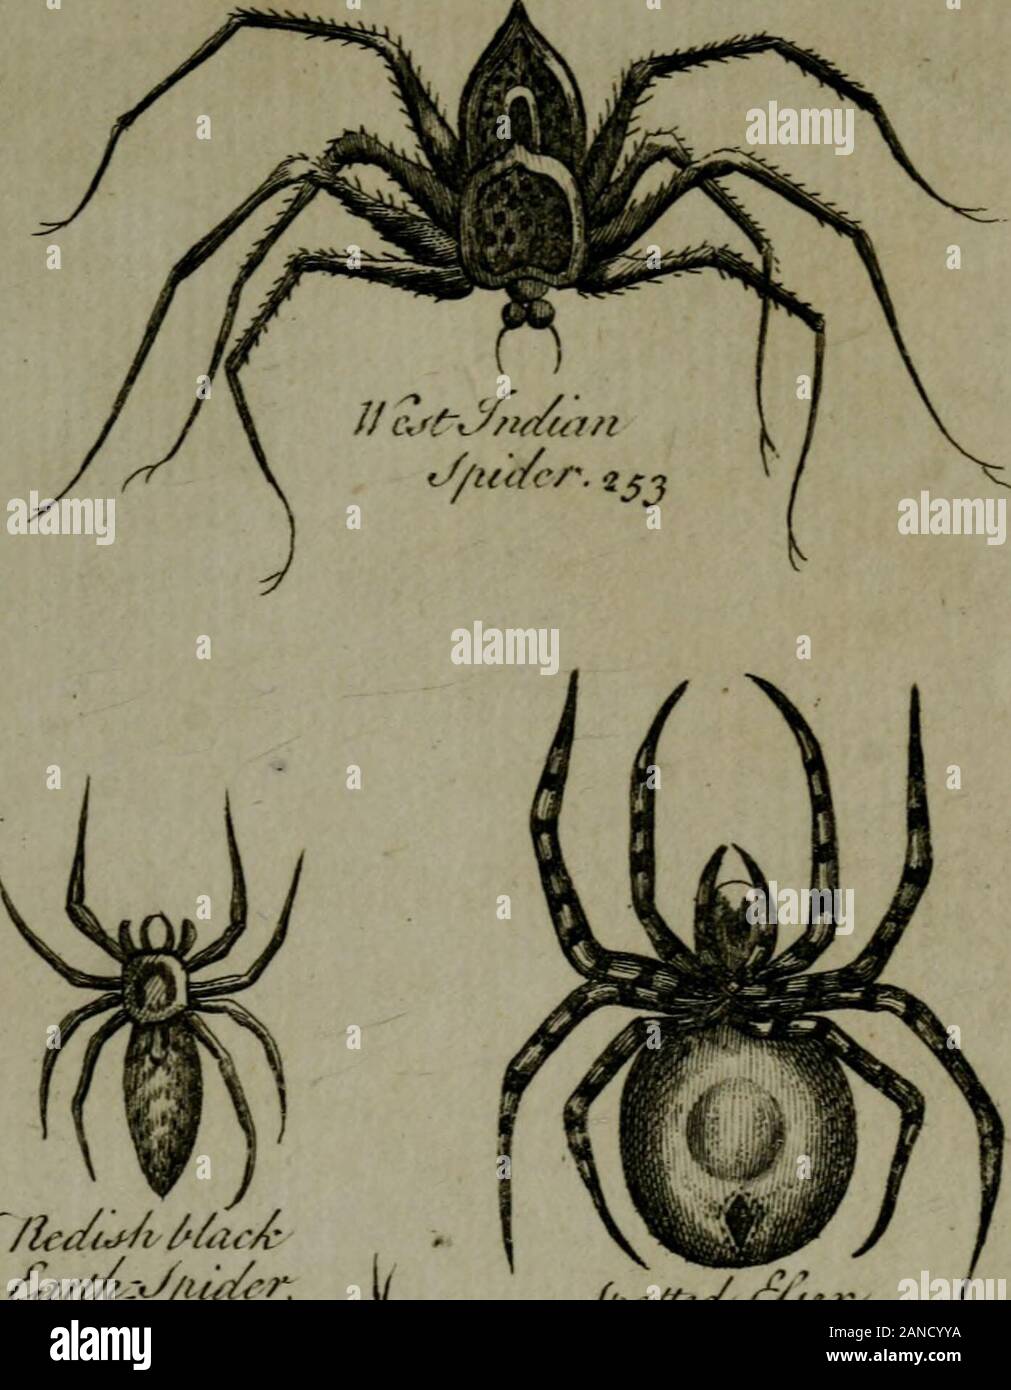 A new and accurate system of natural history .. . R w//&gt;6 iva-ved lines at the //?-fertions of the legs. 20. Tht brovjn and Tariegated SFJDER m^ith lineslike lea&lt;ves. 21. The little grey SPIDER, ^ith a black Jpot onthe hips. 22. Tht/mall hlueijh SPIDER oy///^ « toothed fpoton the hips. 23. The long leggedyellovo hairy SPIDER. 24. The great grey SPIDER fivith ^very fro^ninent?appendages at the Dent. 25. The dujky SPIDER variegated VJtth a brightzvhite. 26. The black SPIDER iJiiih denticulated r^vhite fpots. 27. The great blackijh SPIDER variegated withfpots of a deeper black. 28. The grey Stock Photo